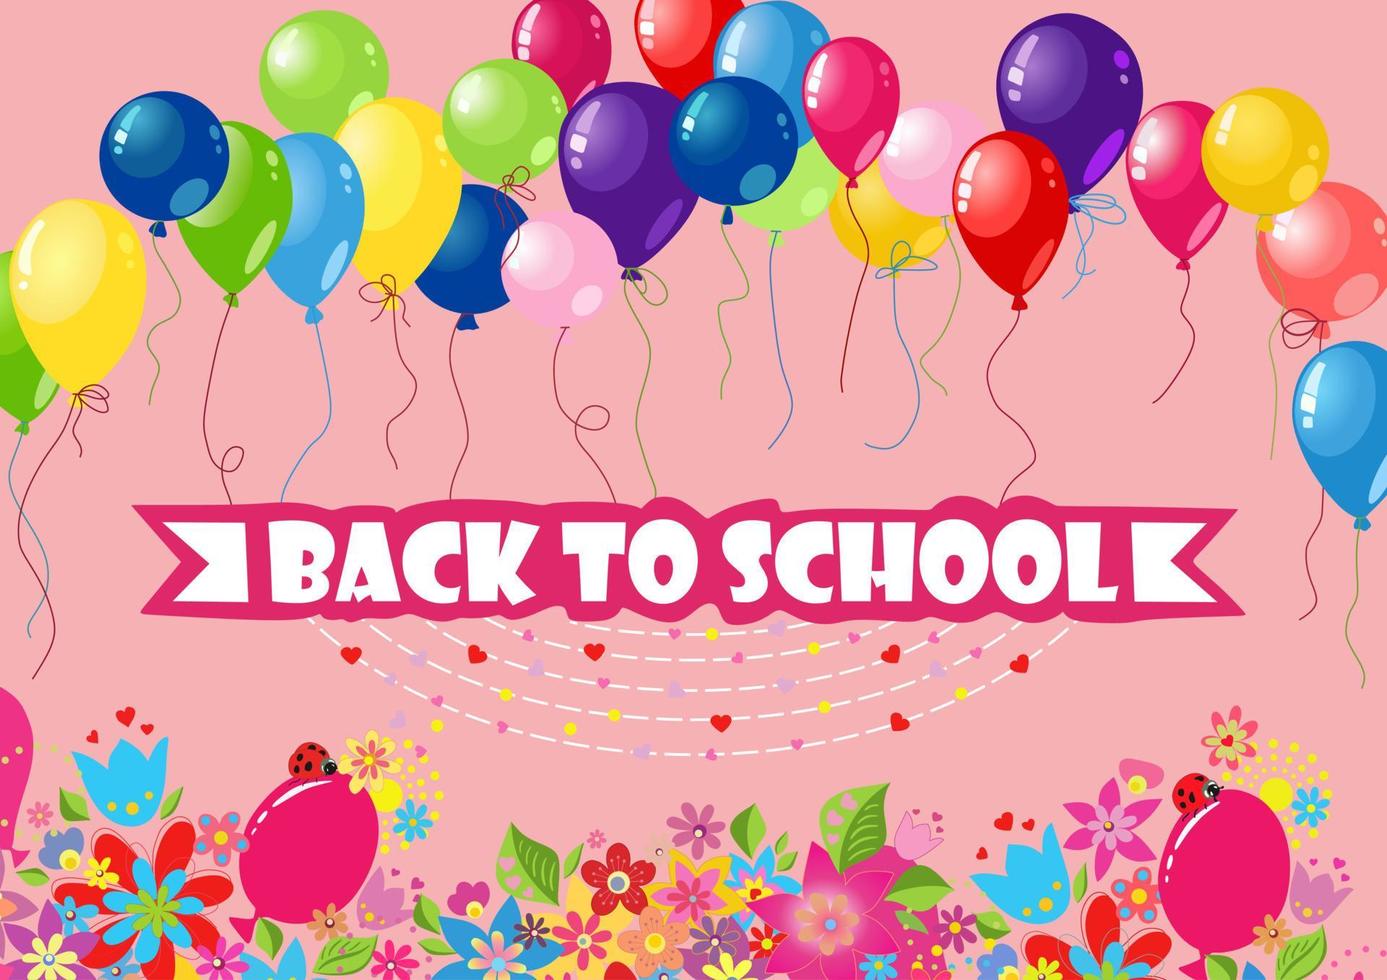 Back to school banner. Balloons and flowers. Pink background. Text. Joyful and fun. vector